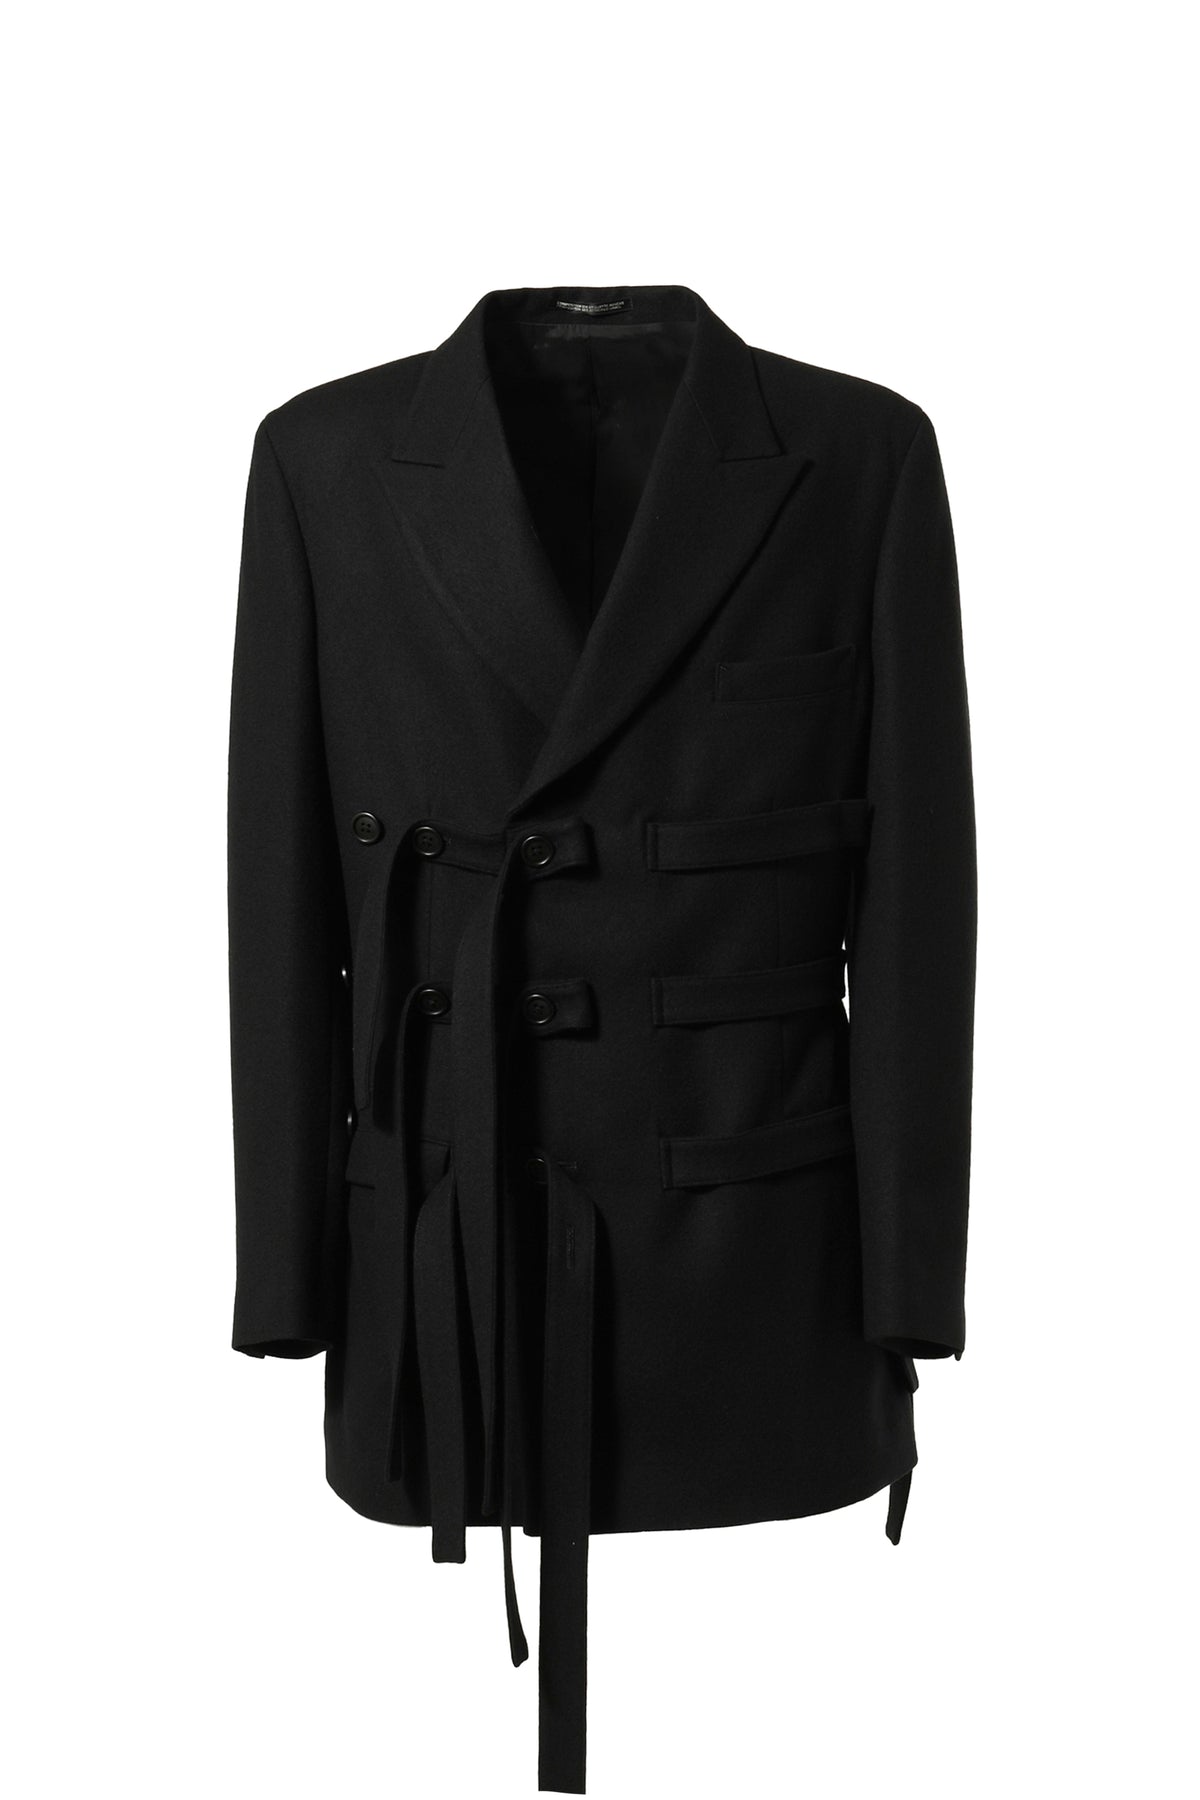 W-BELTED DOUBLE JKT / BLK